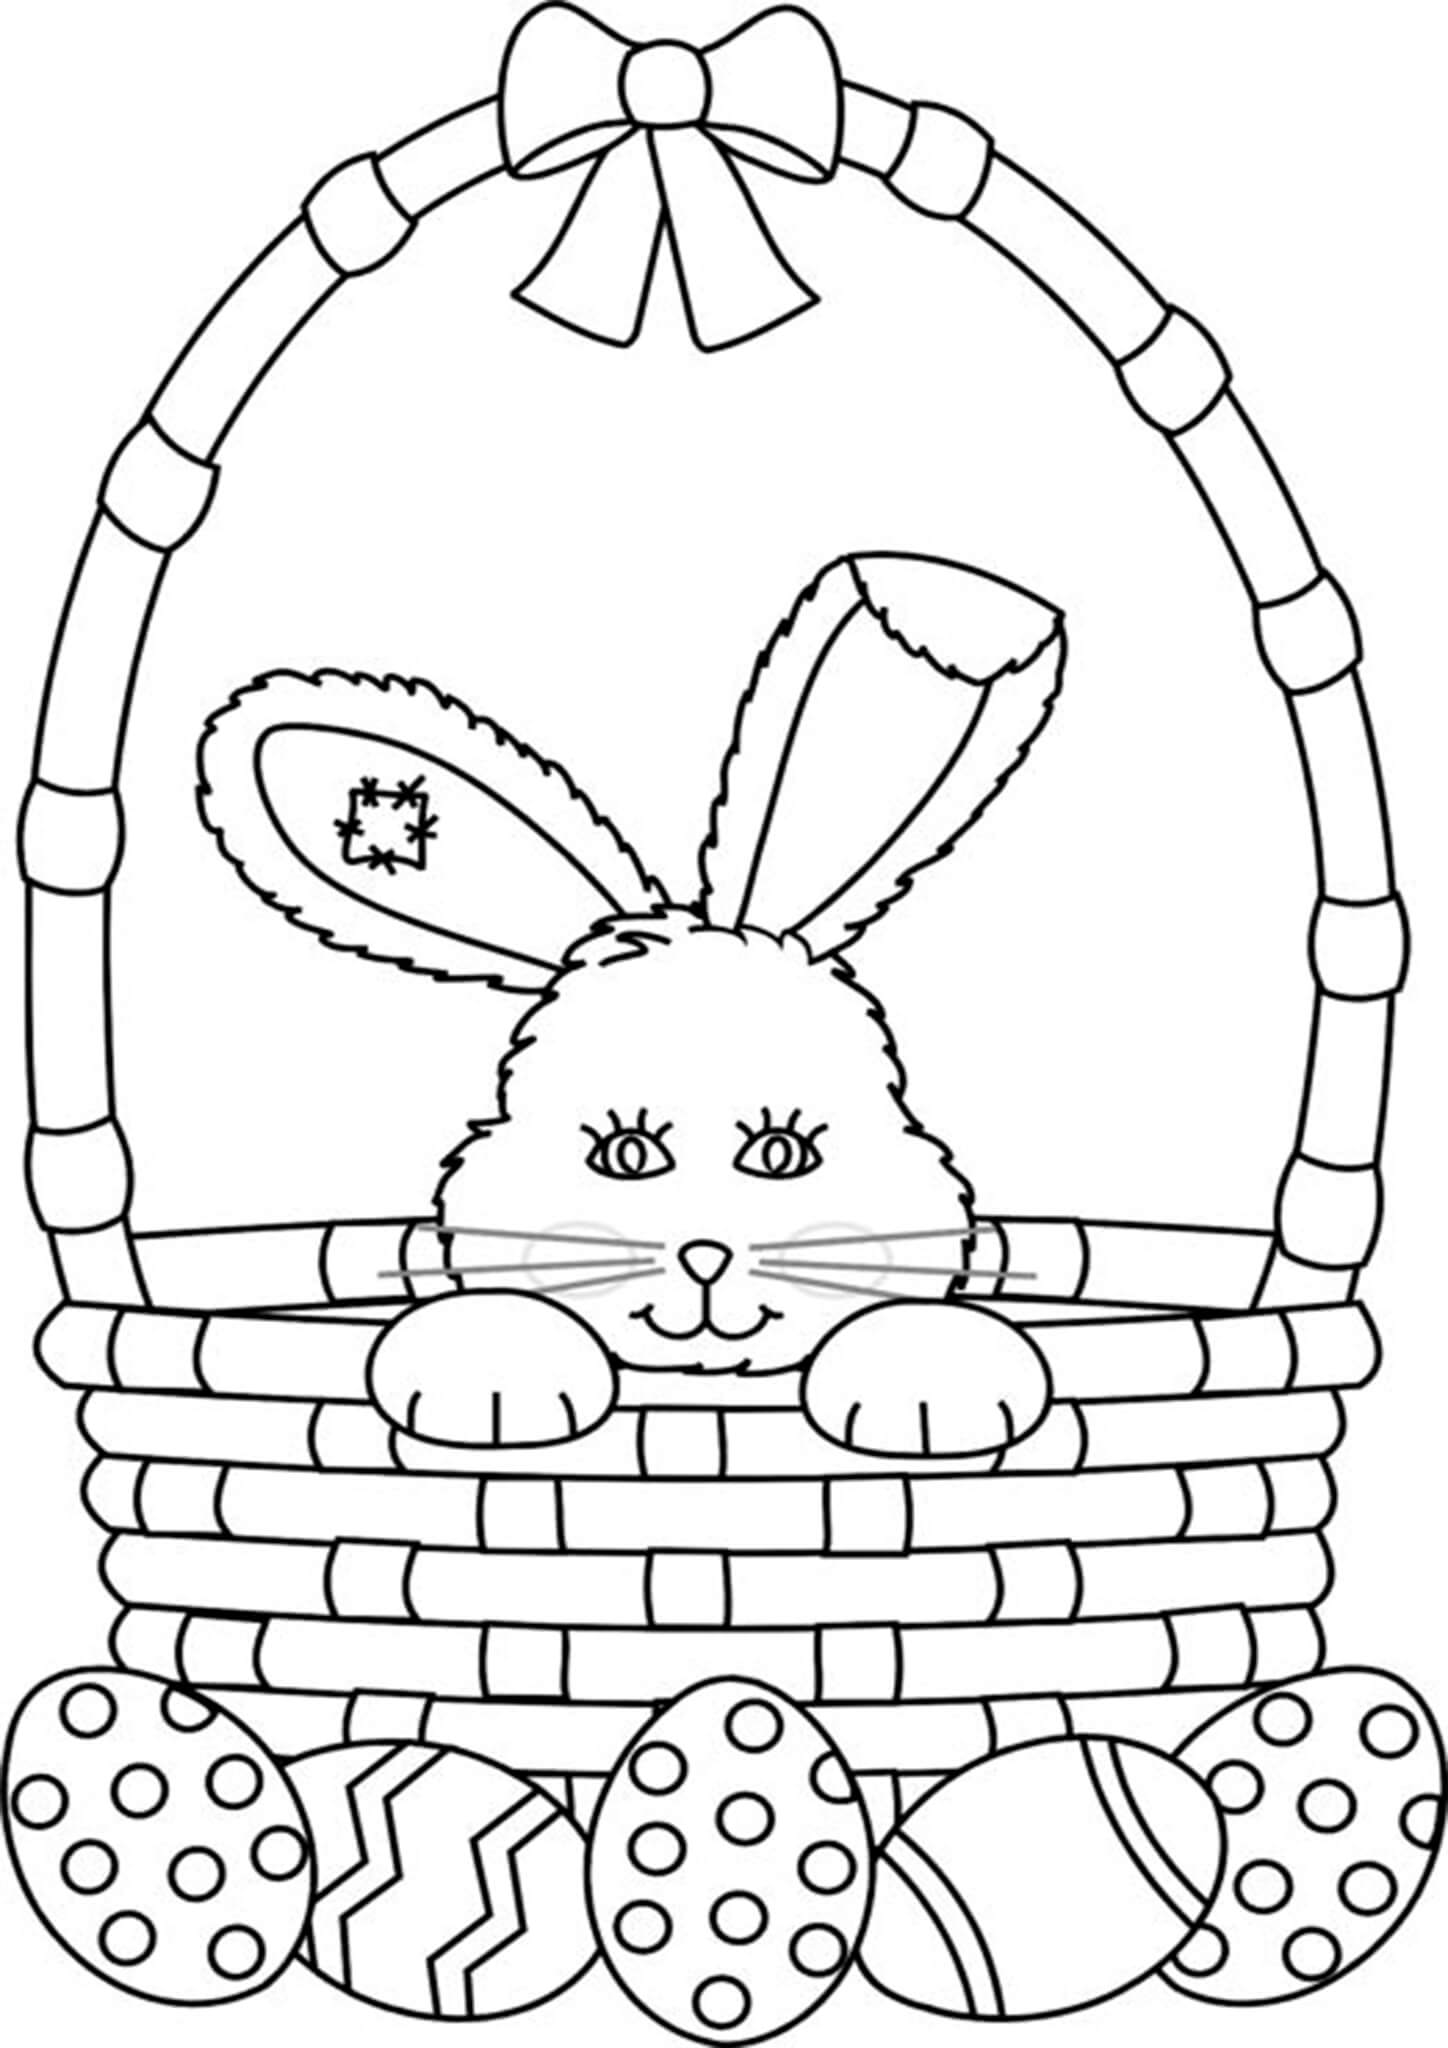 Free easy to print easter coloring pages